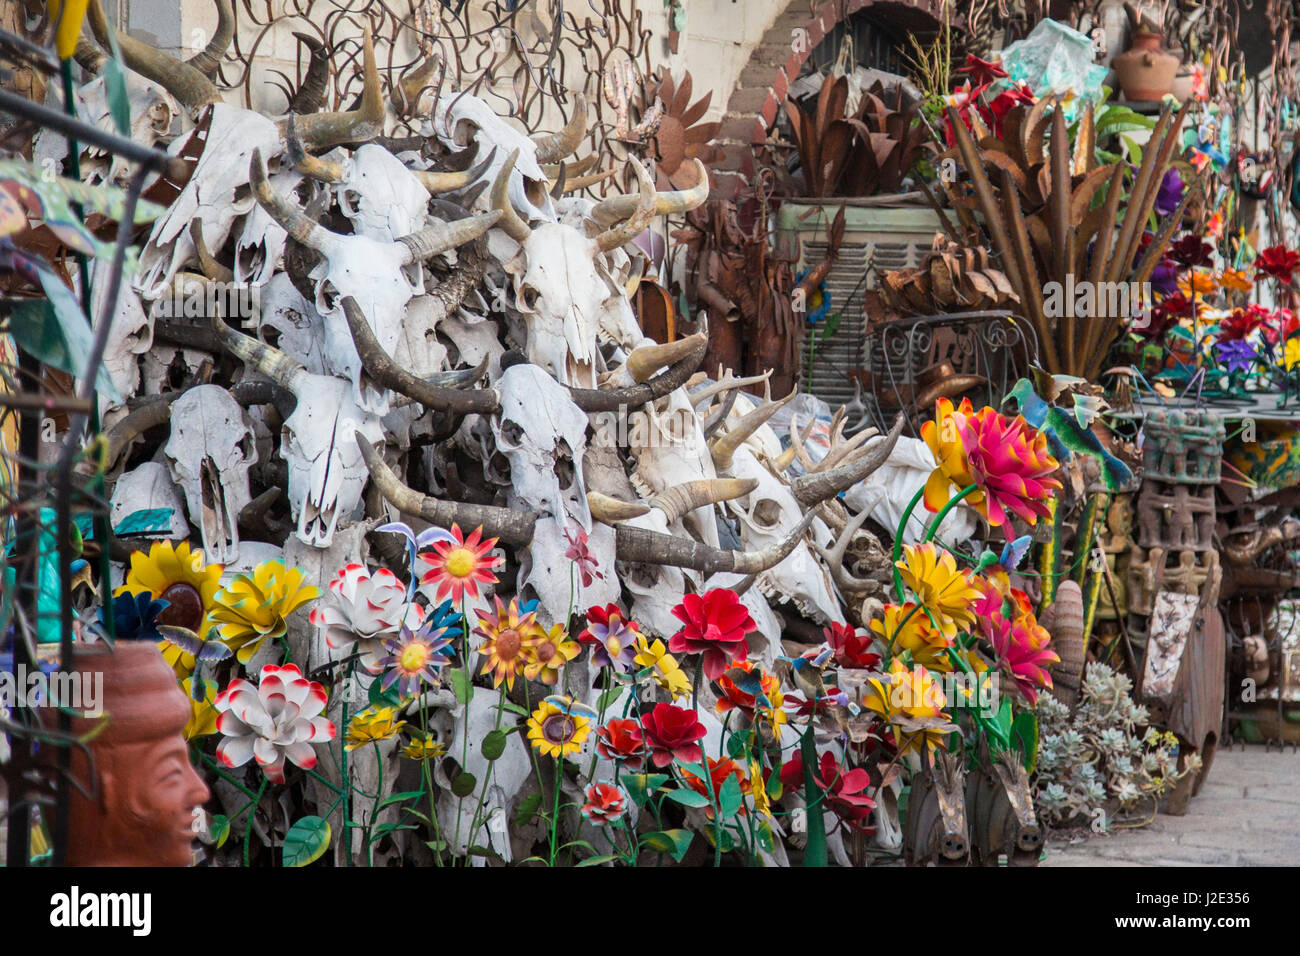 Nogales, Sonora, Mexico - Skulls and flowers on sale at a souvenir shop near the U.S.-Mexico border. Stock Photo